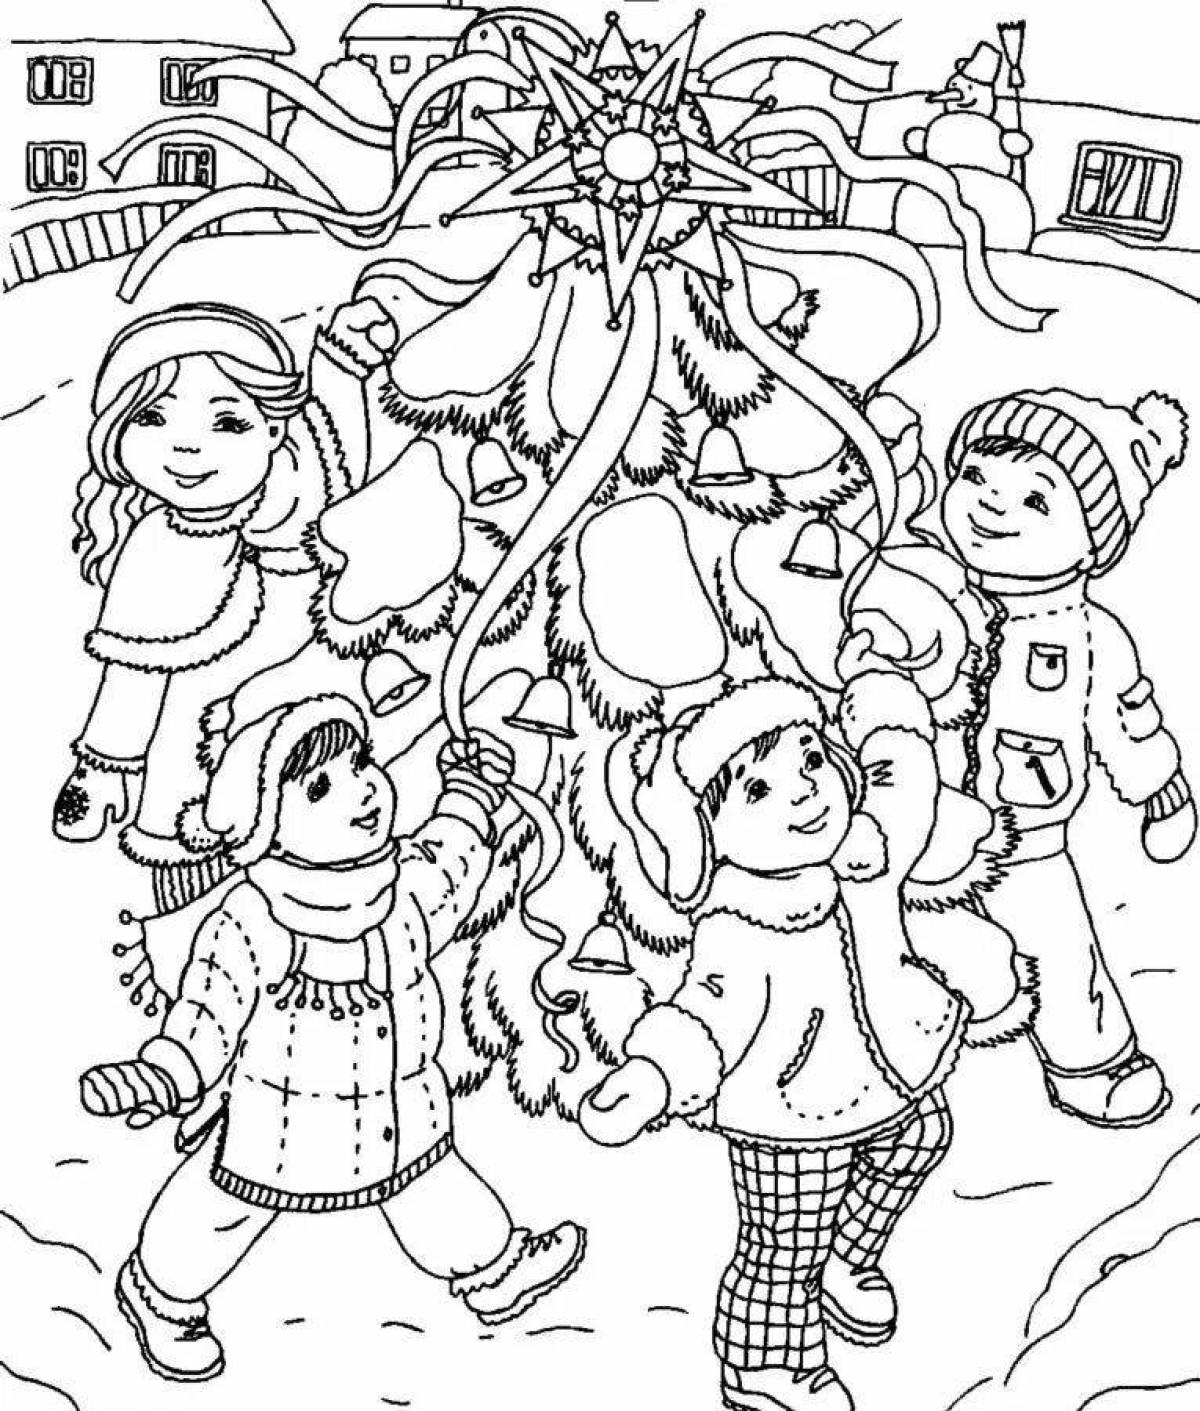 Coloring page Merry Shrovetide Tuesday